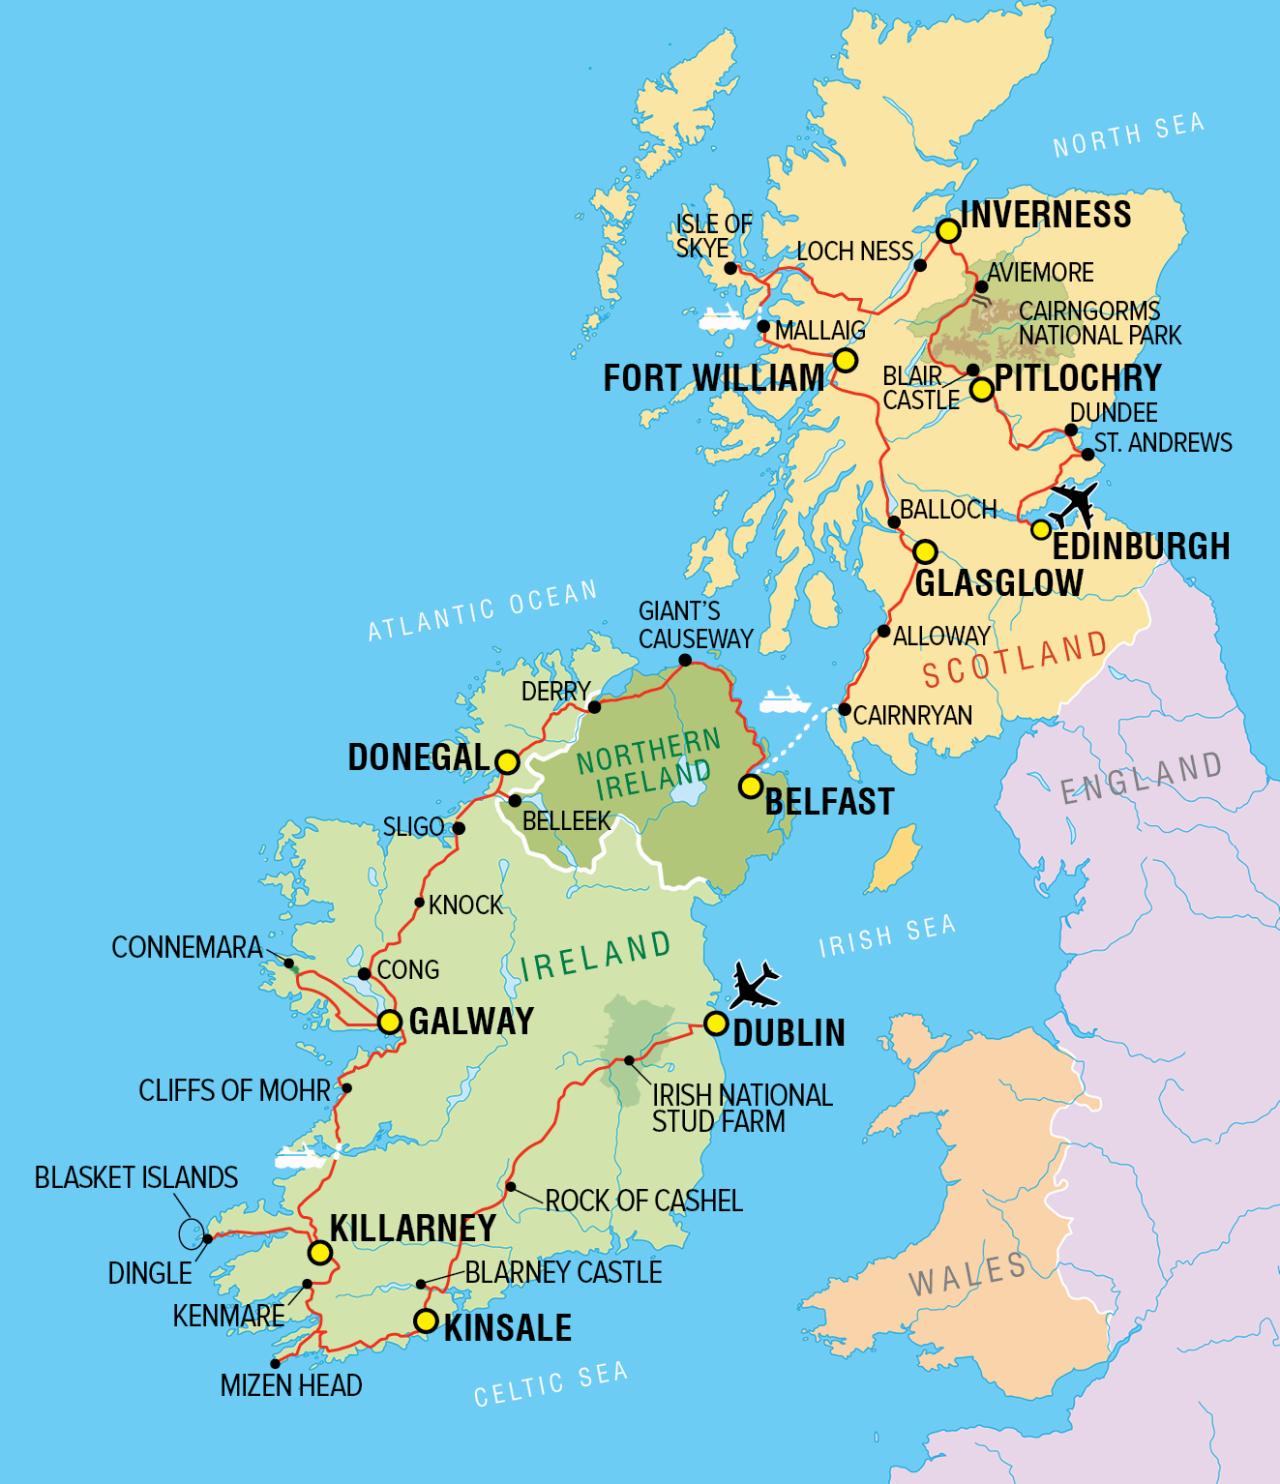 travel to ireland scotland and wales